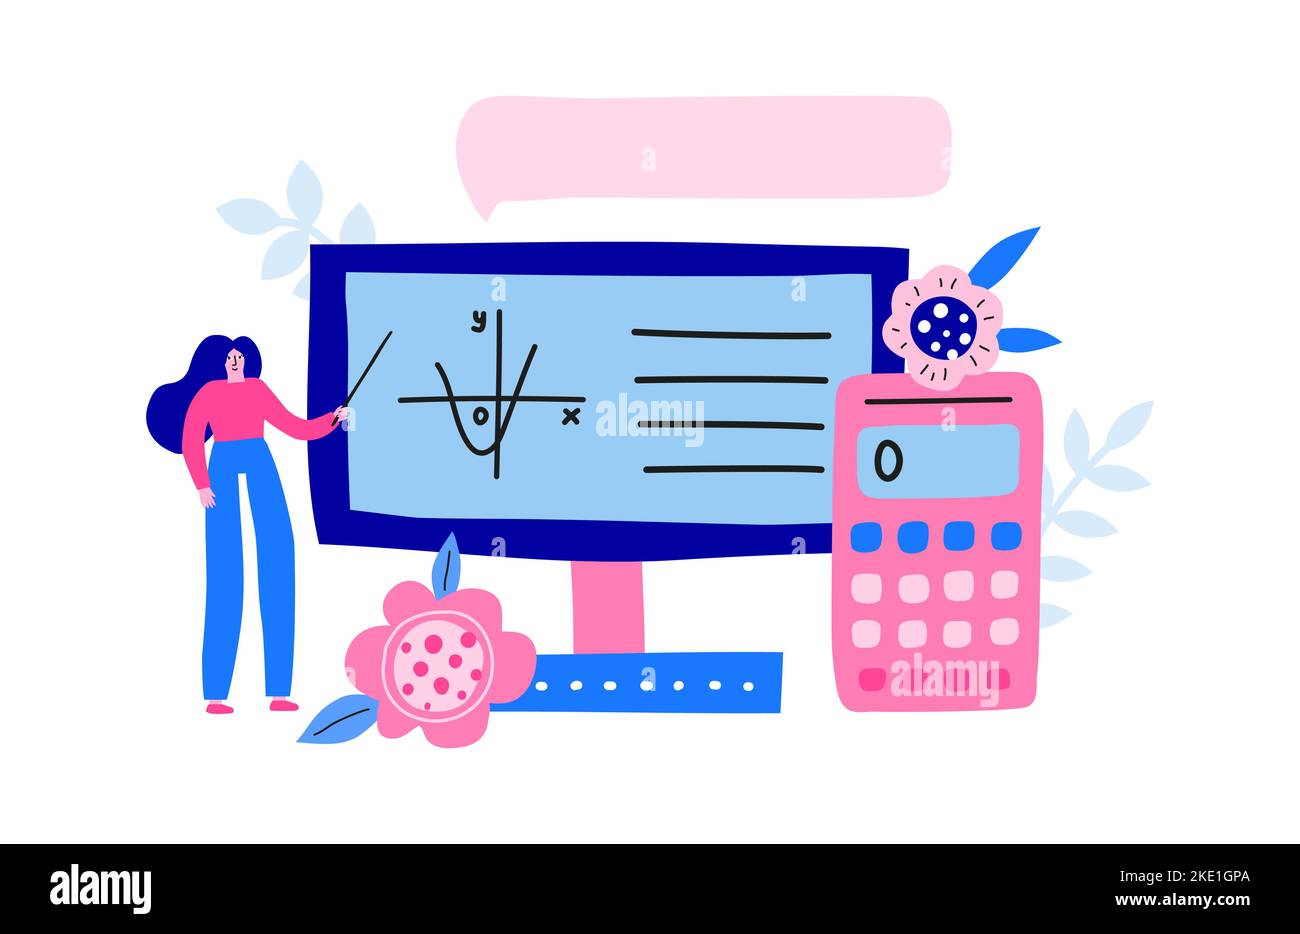 Using Online Calculator for Teaching and Learning Mathematics